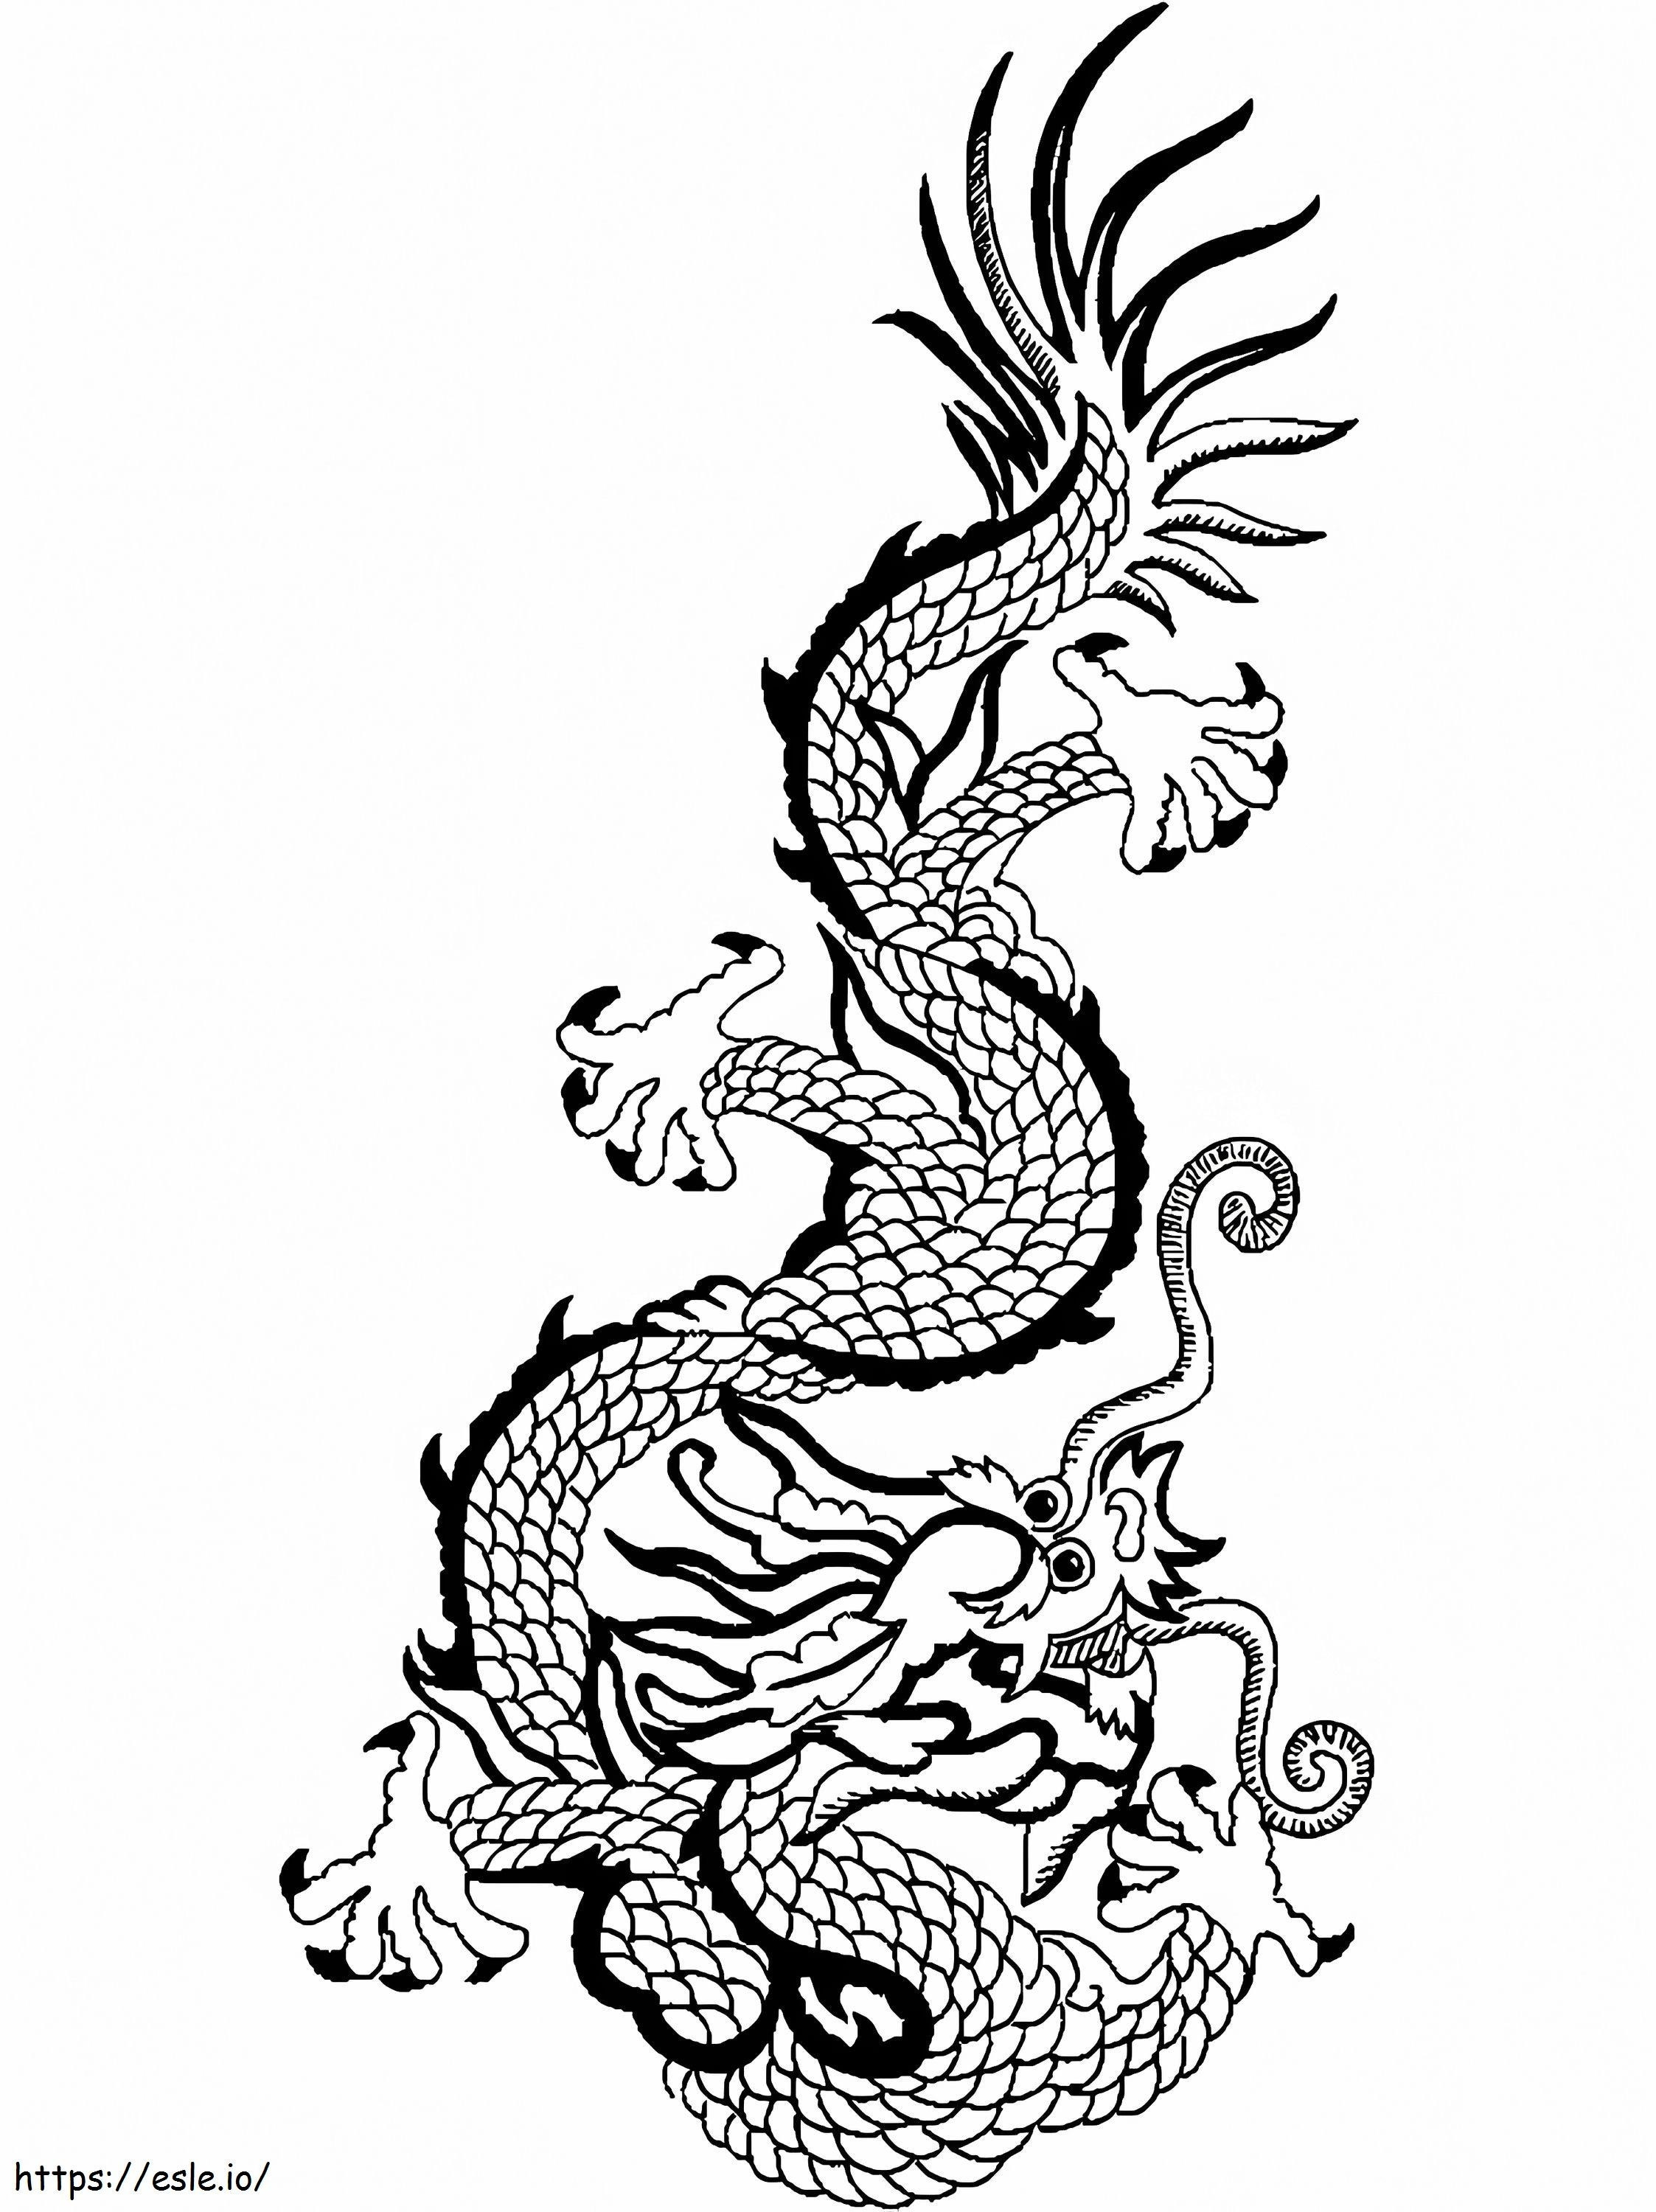 Chinese Dragon 1 coloring page